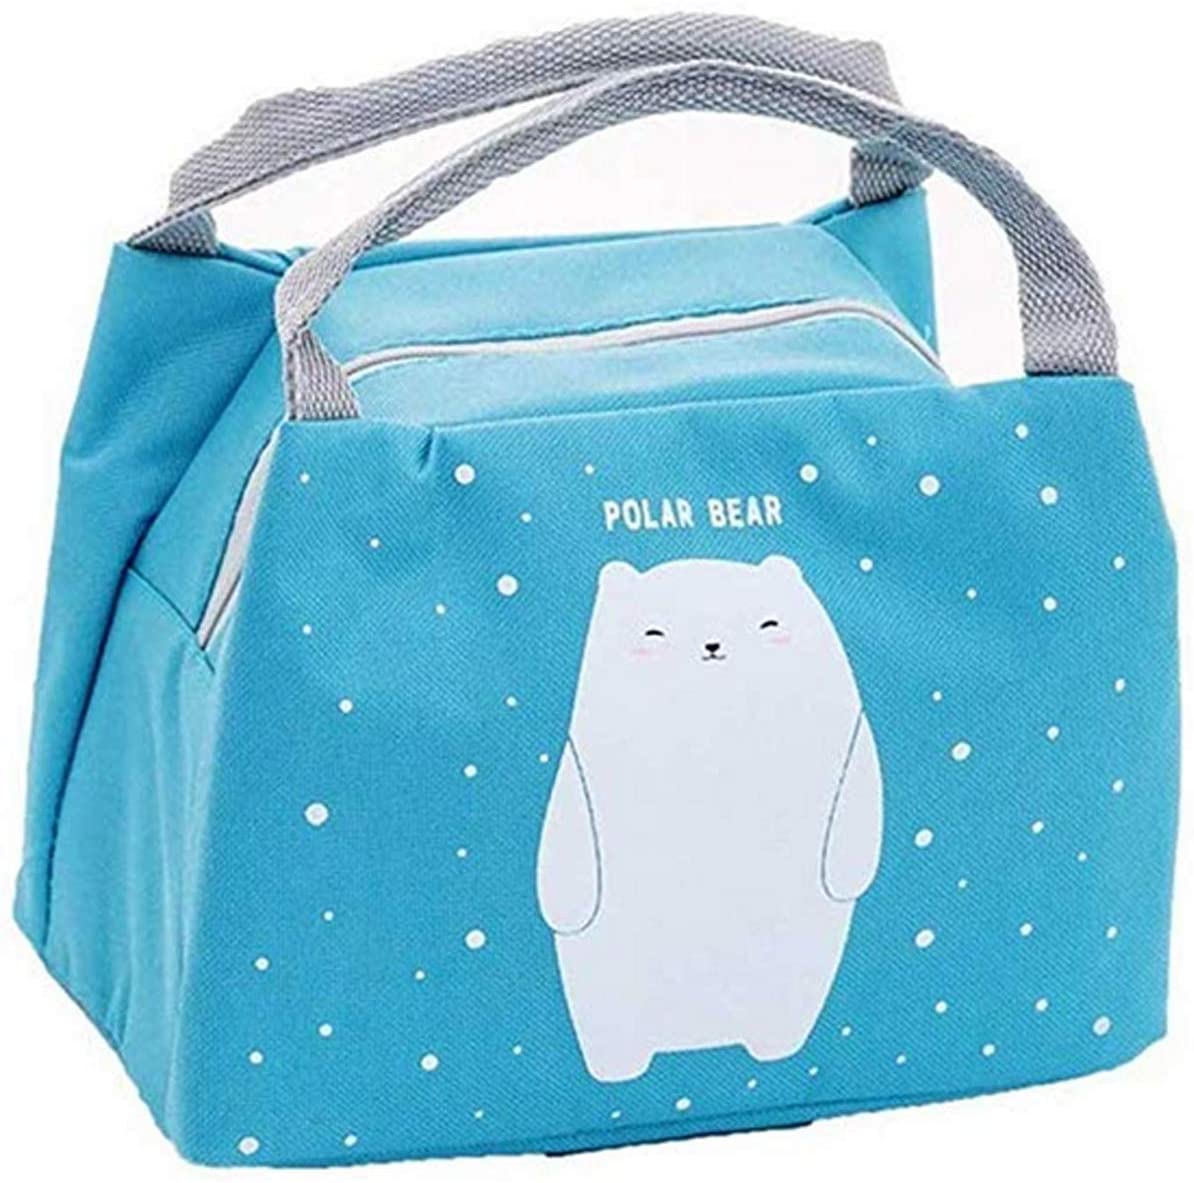 Musuos Musuos Cute Animal Portable Insulated Canvas Cooler Picnic Lunch Bag Thermal Food Tote